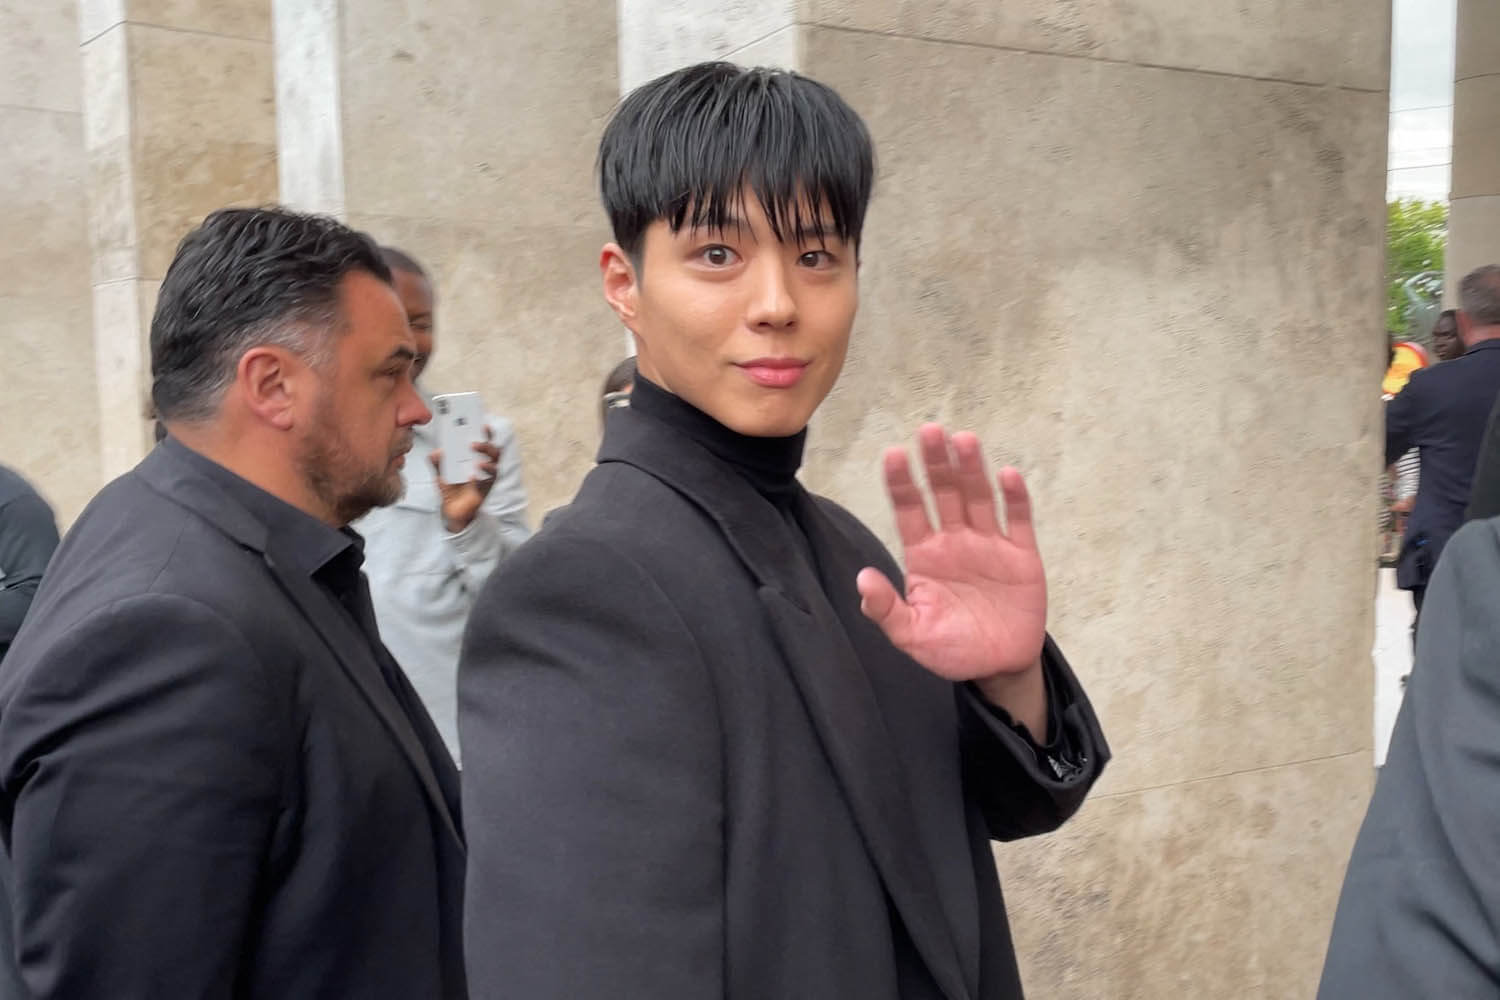 V, Lisa, and Park Bo-gum appear at Paris Fashion week to frenzied